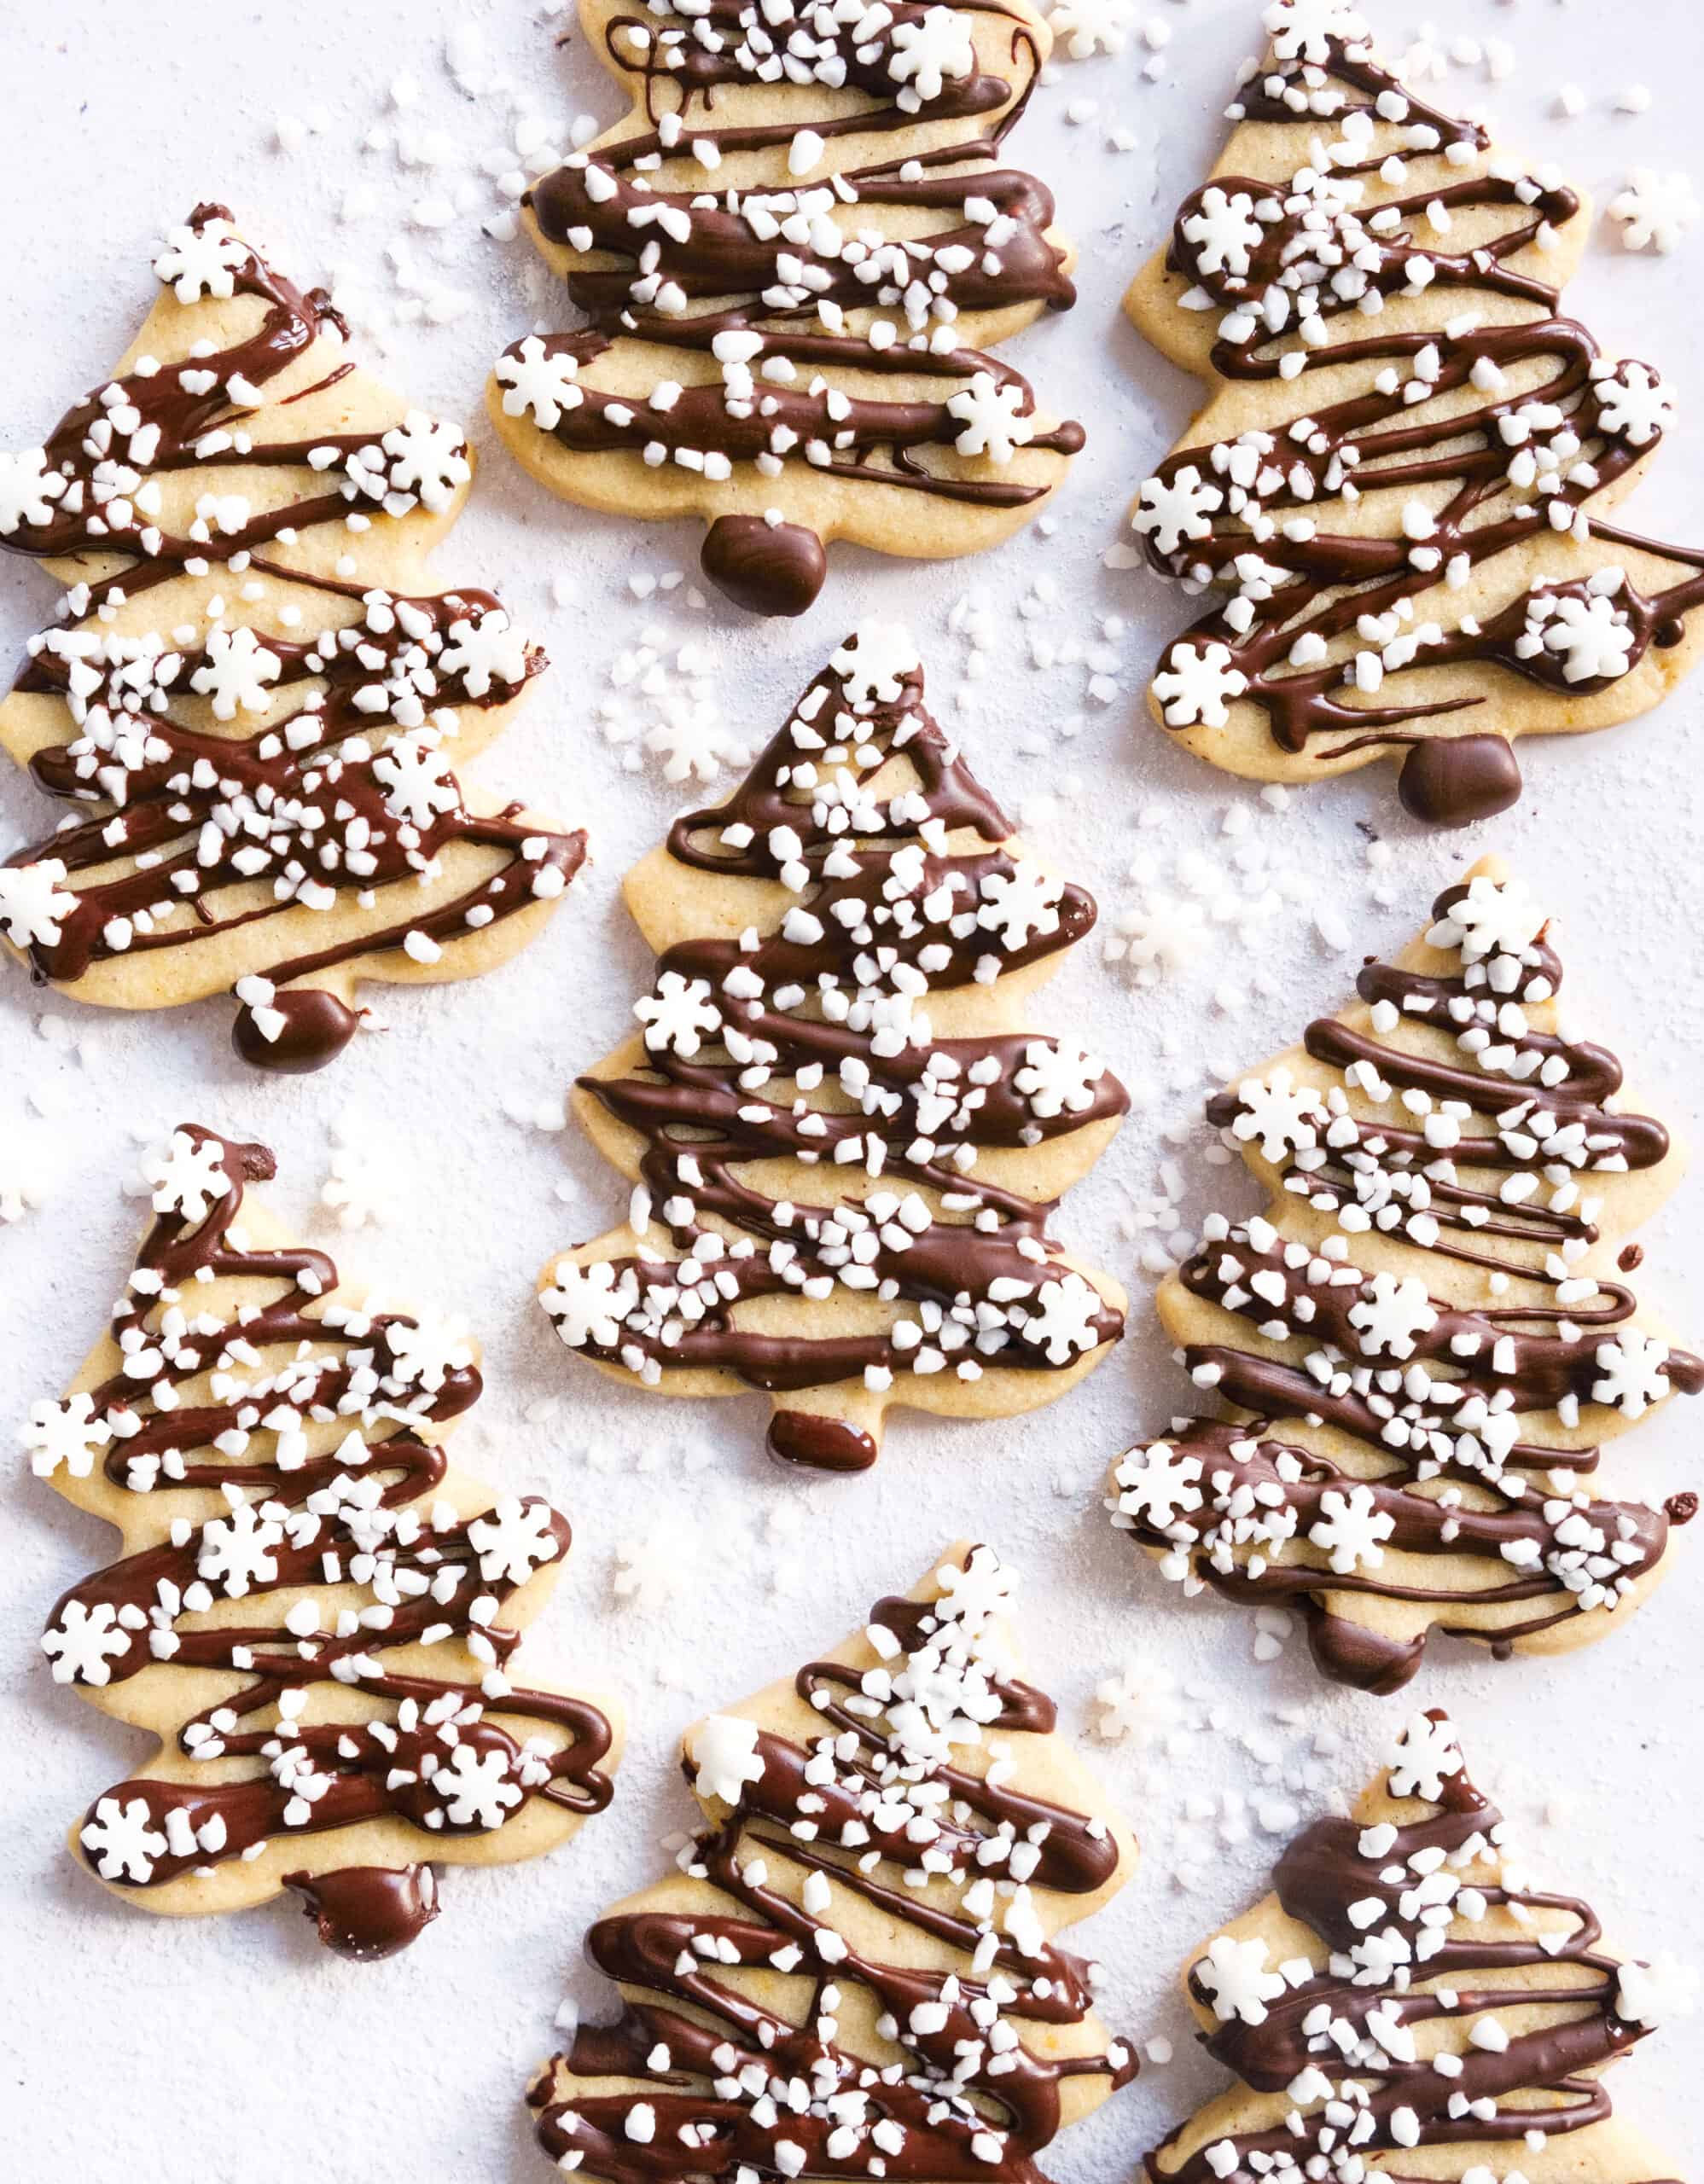 Top view of some Christmas tree cookies decorated with dark chocolate and white sugar sprinkles.